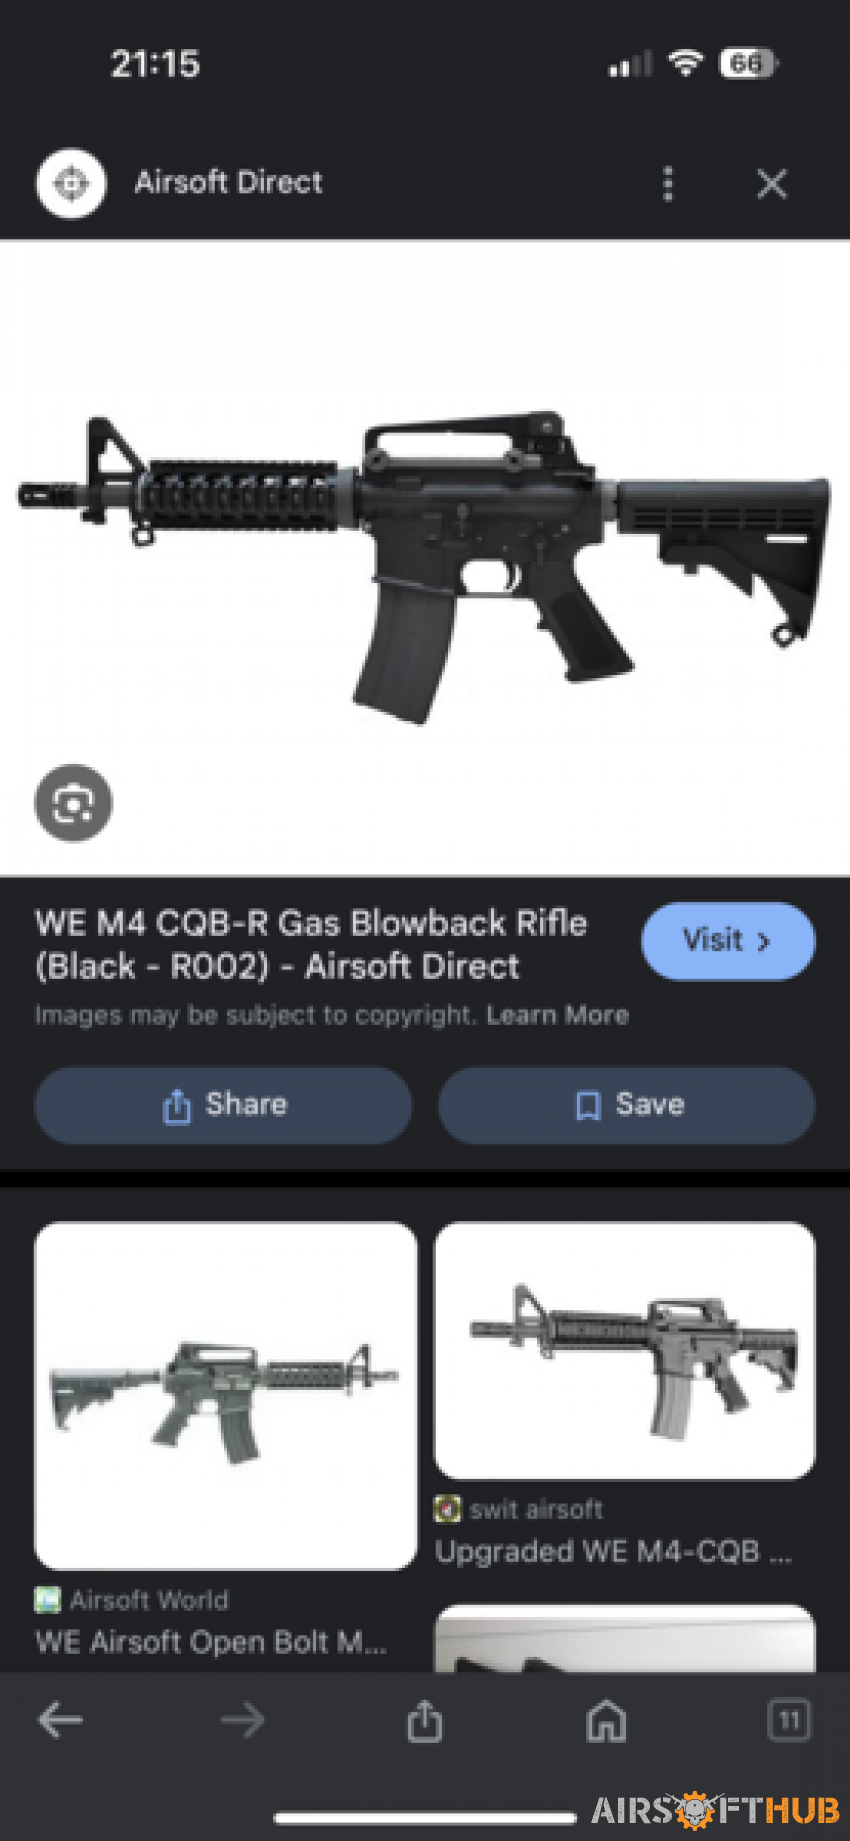 WE GBBR M4 or MSK in black - Used airsoft equipment